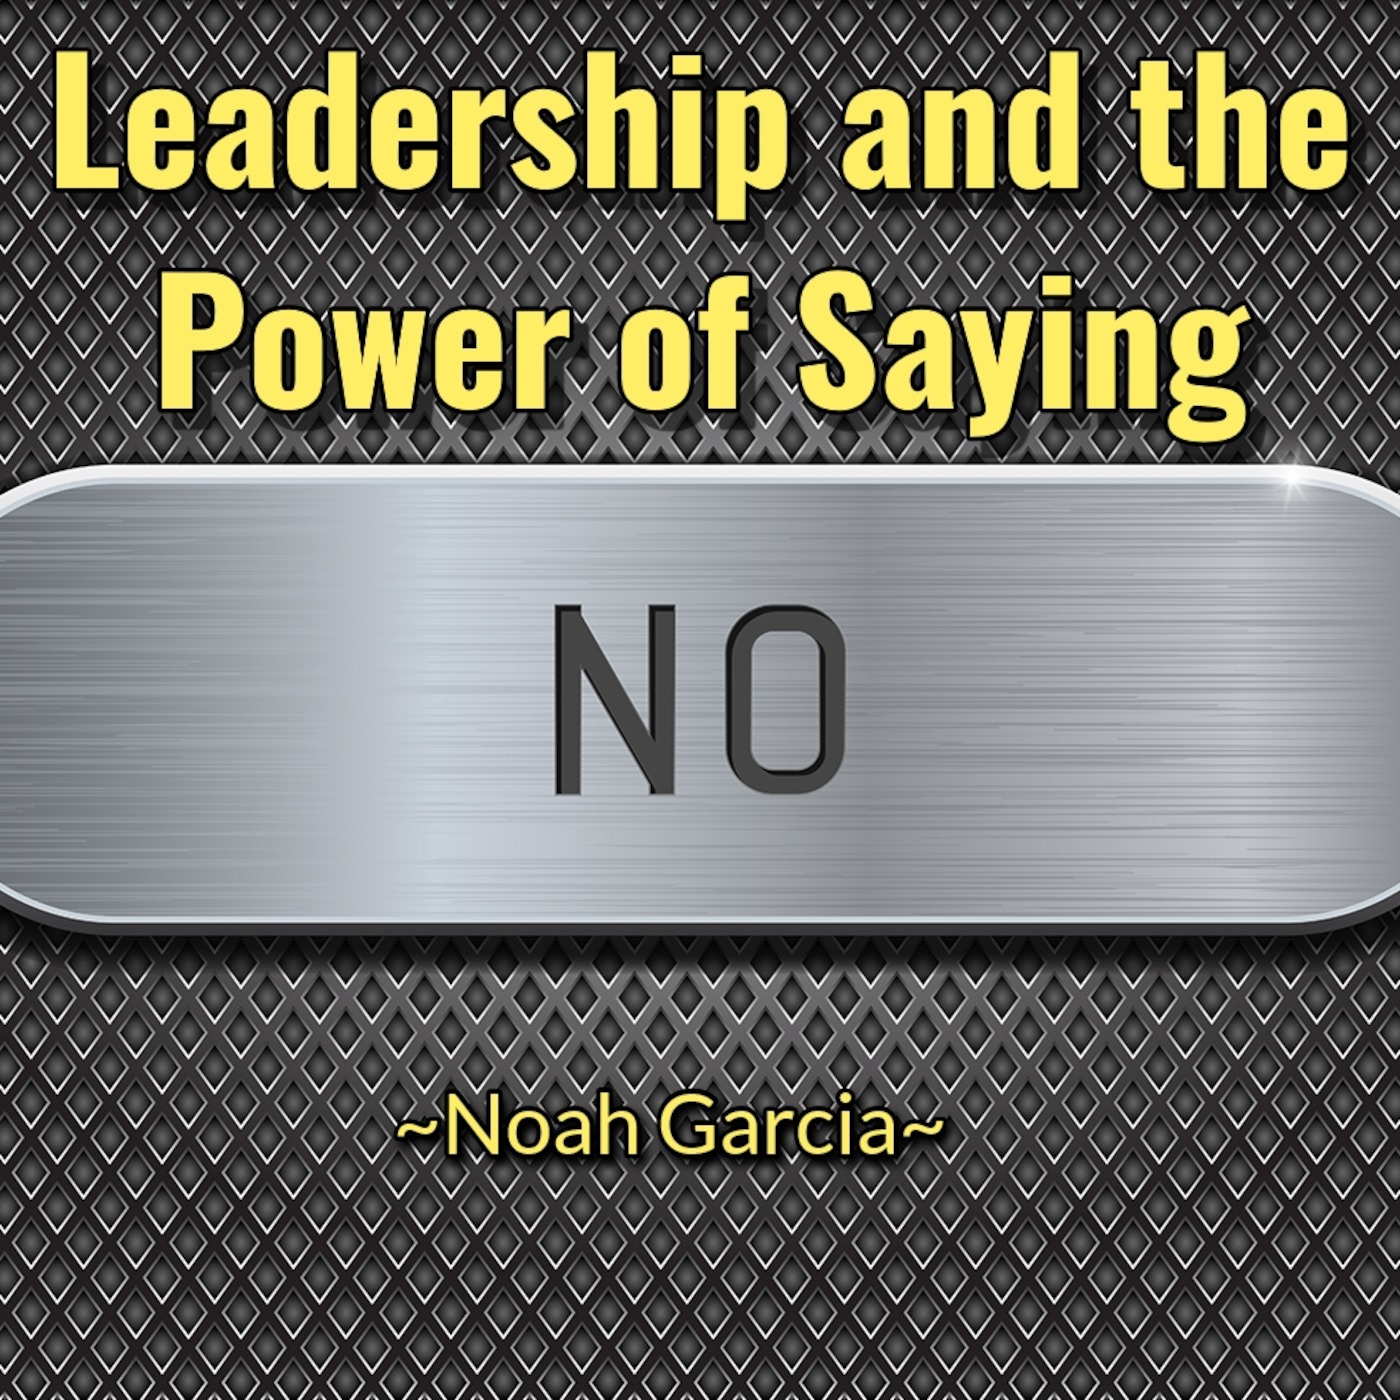 Leadership and the Power of Saying No